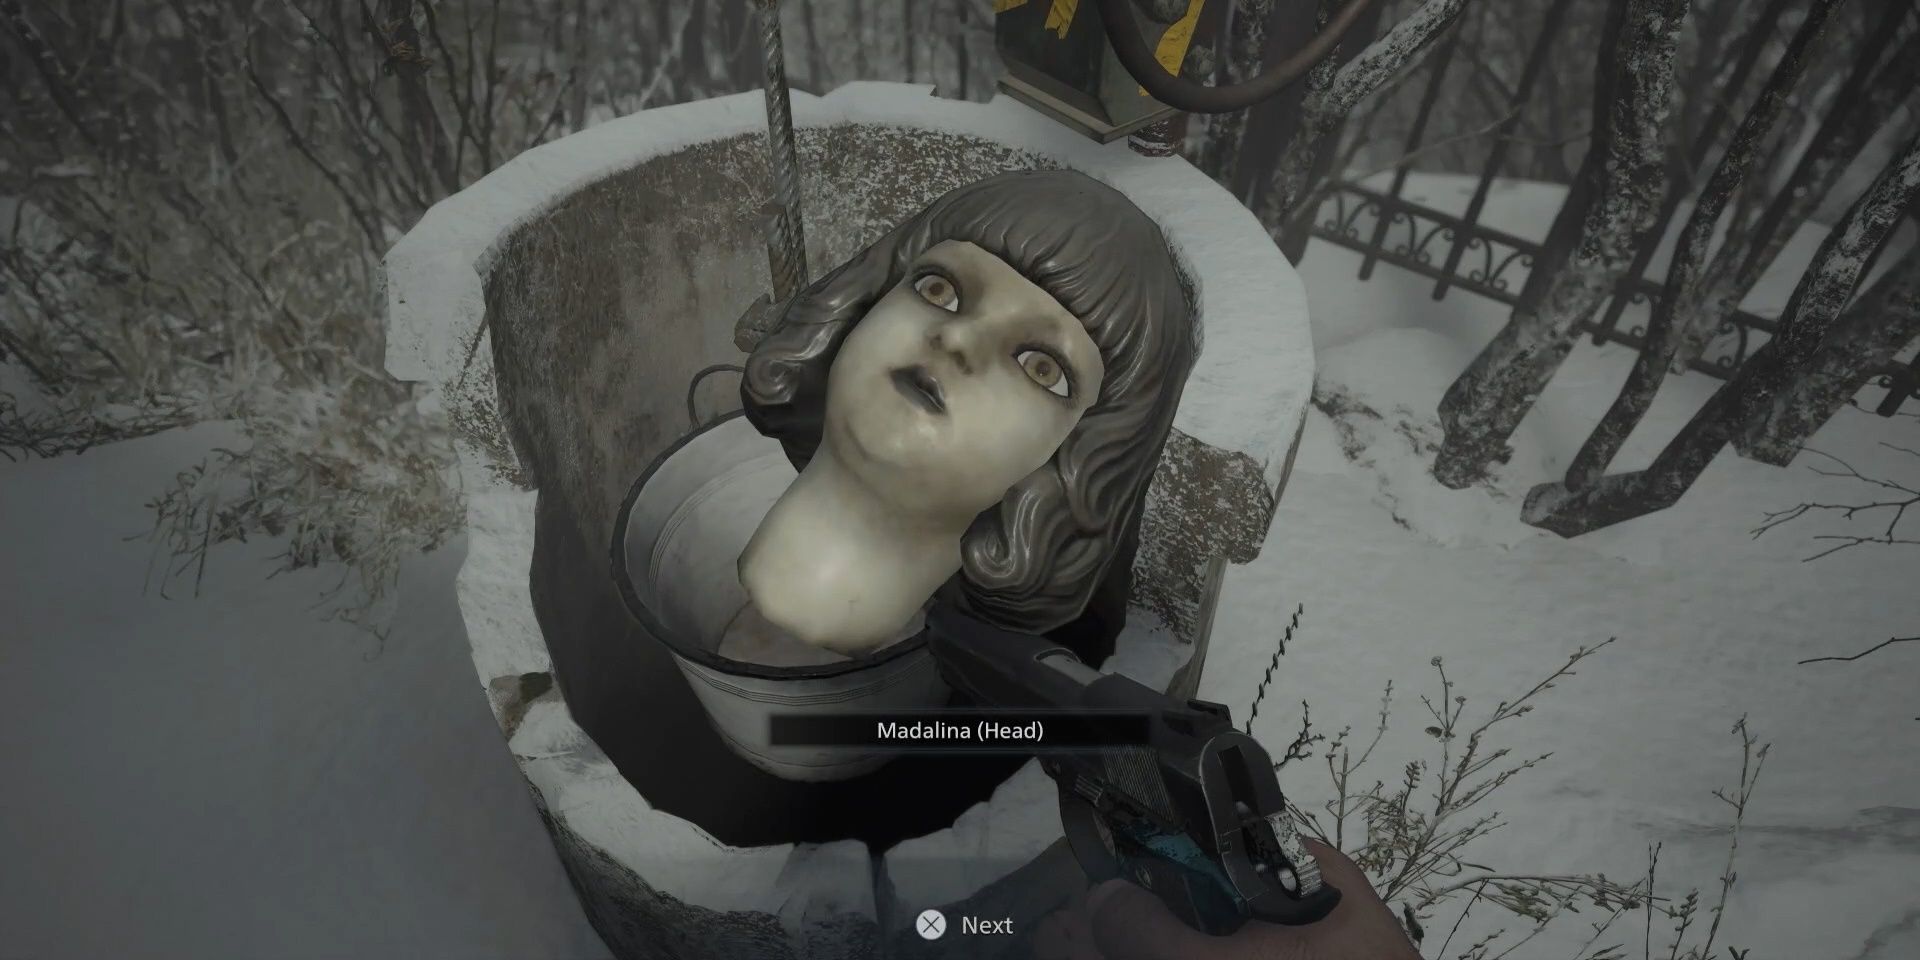 Madelina head in the well in Resident Evil Village